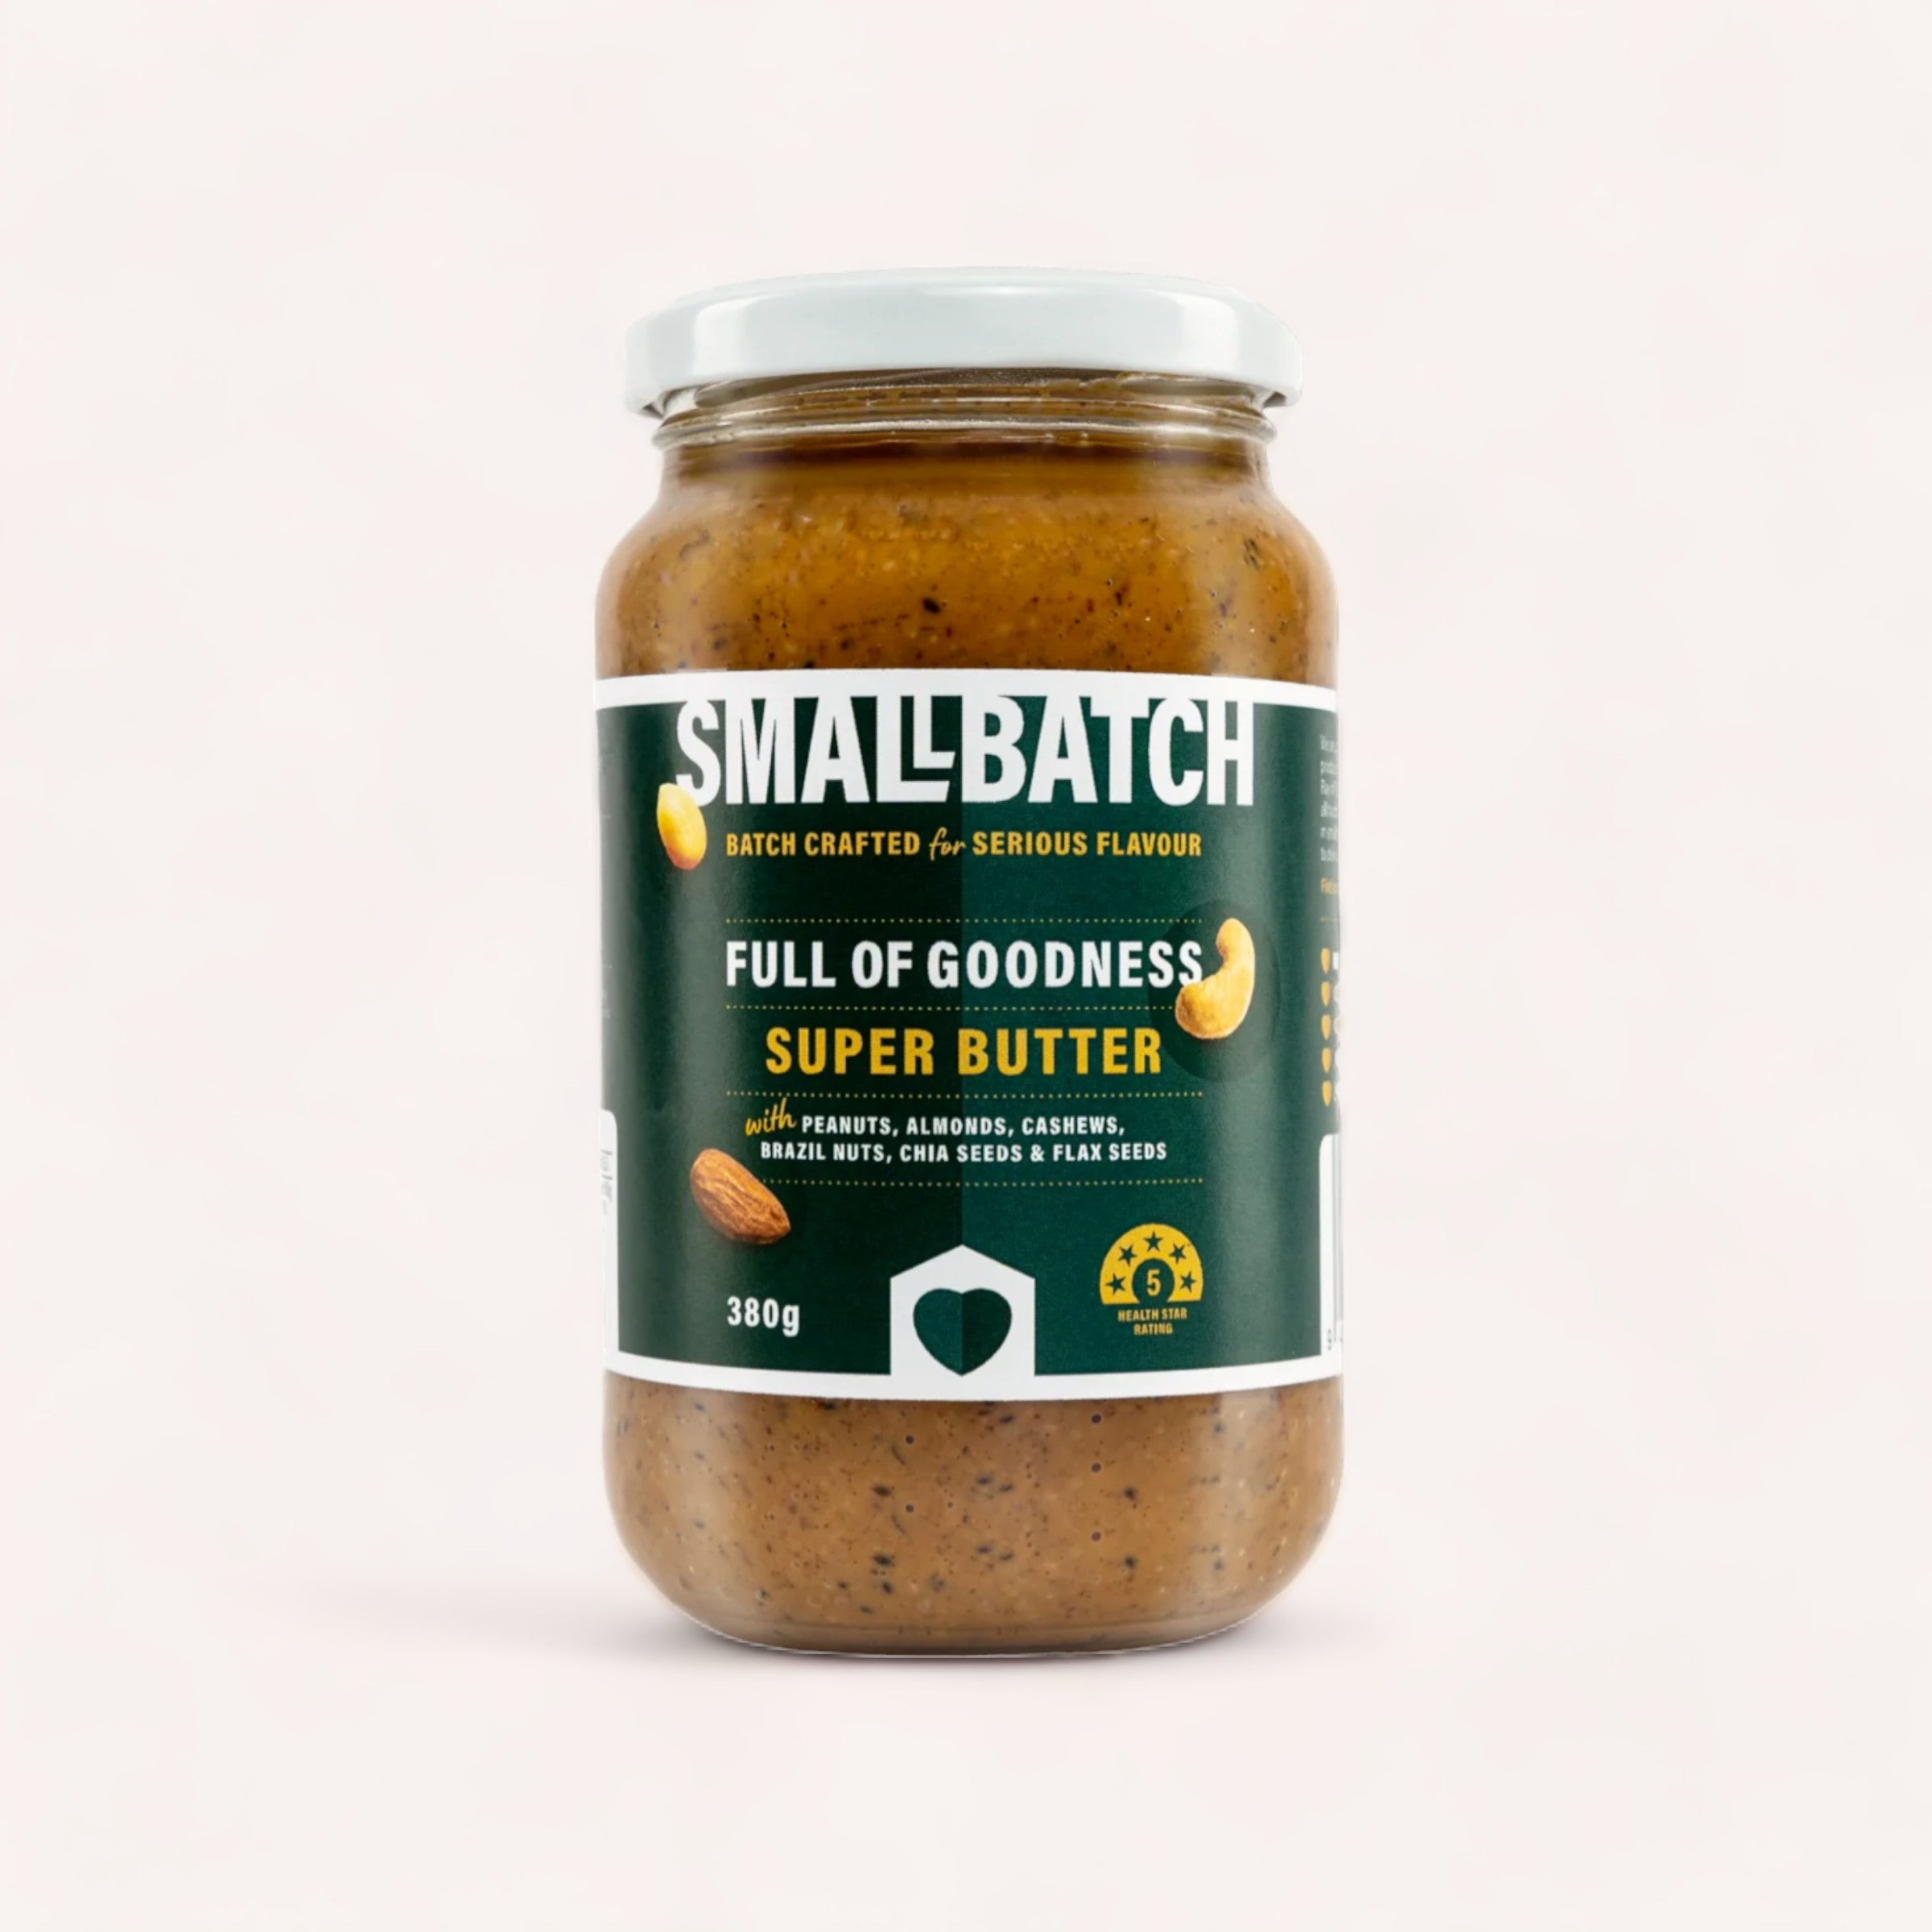 A jar of Smallbatch Nut Butter - Super Butter placed against a white background, highlighting its natural ingredients like high-oleic peanuts, almonds, cashews, hazelnuts, chia.